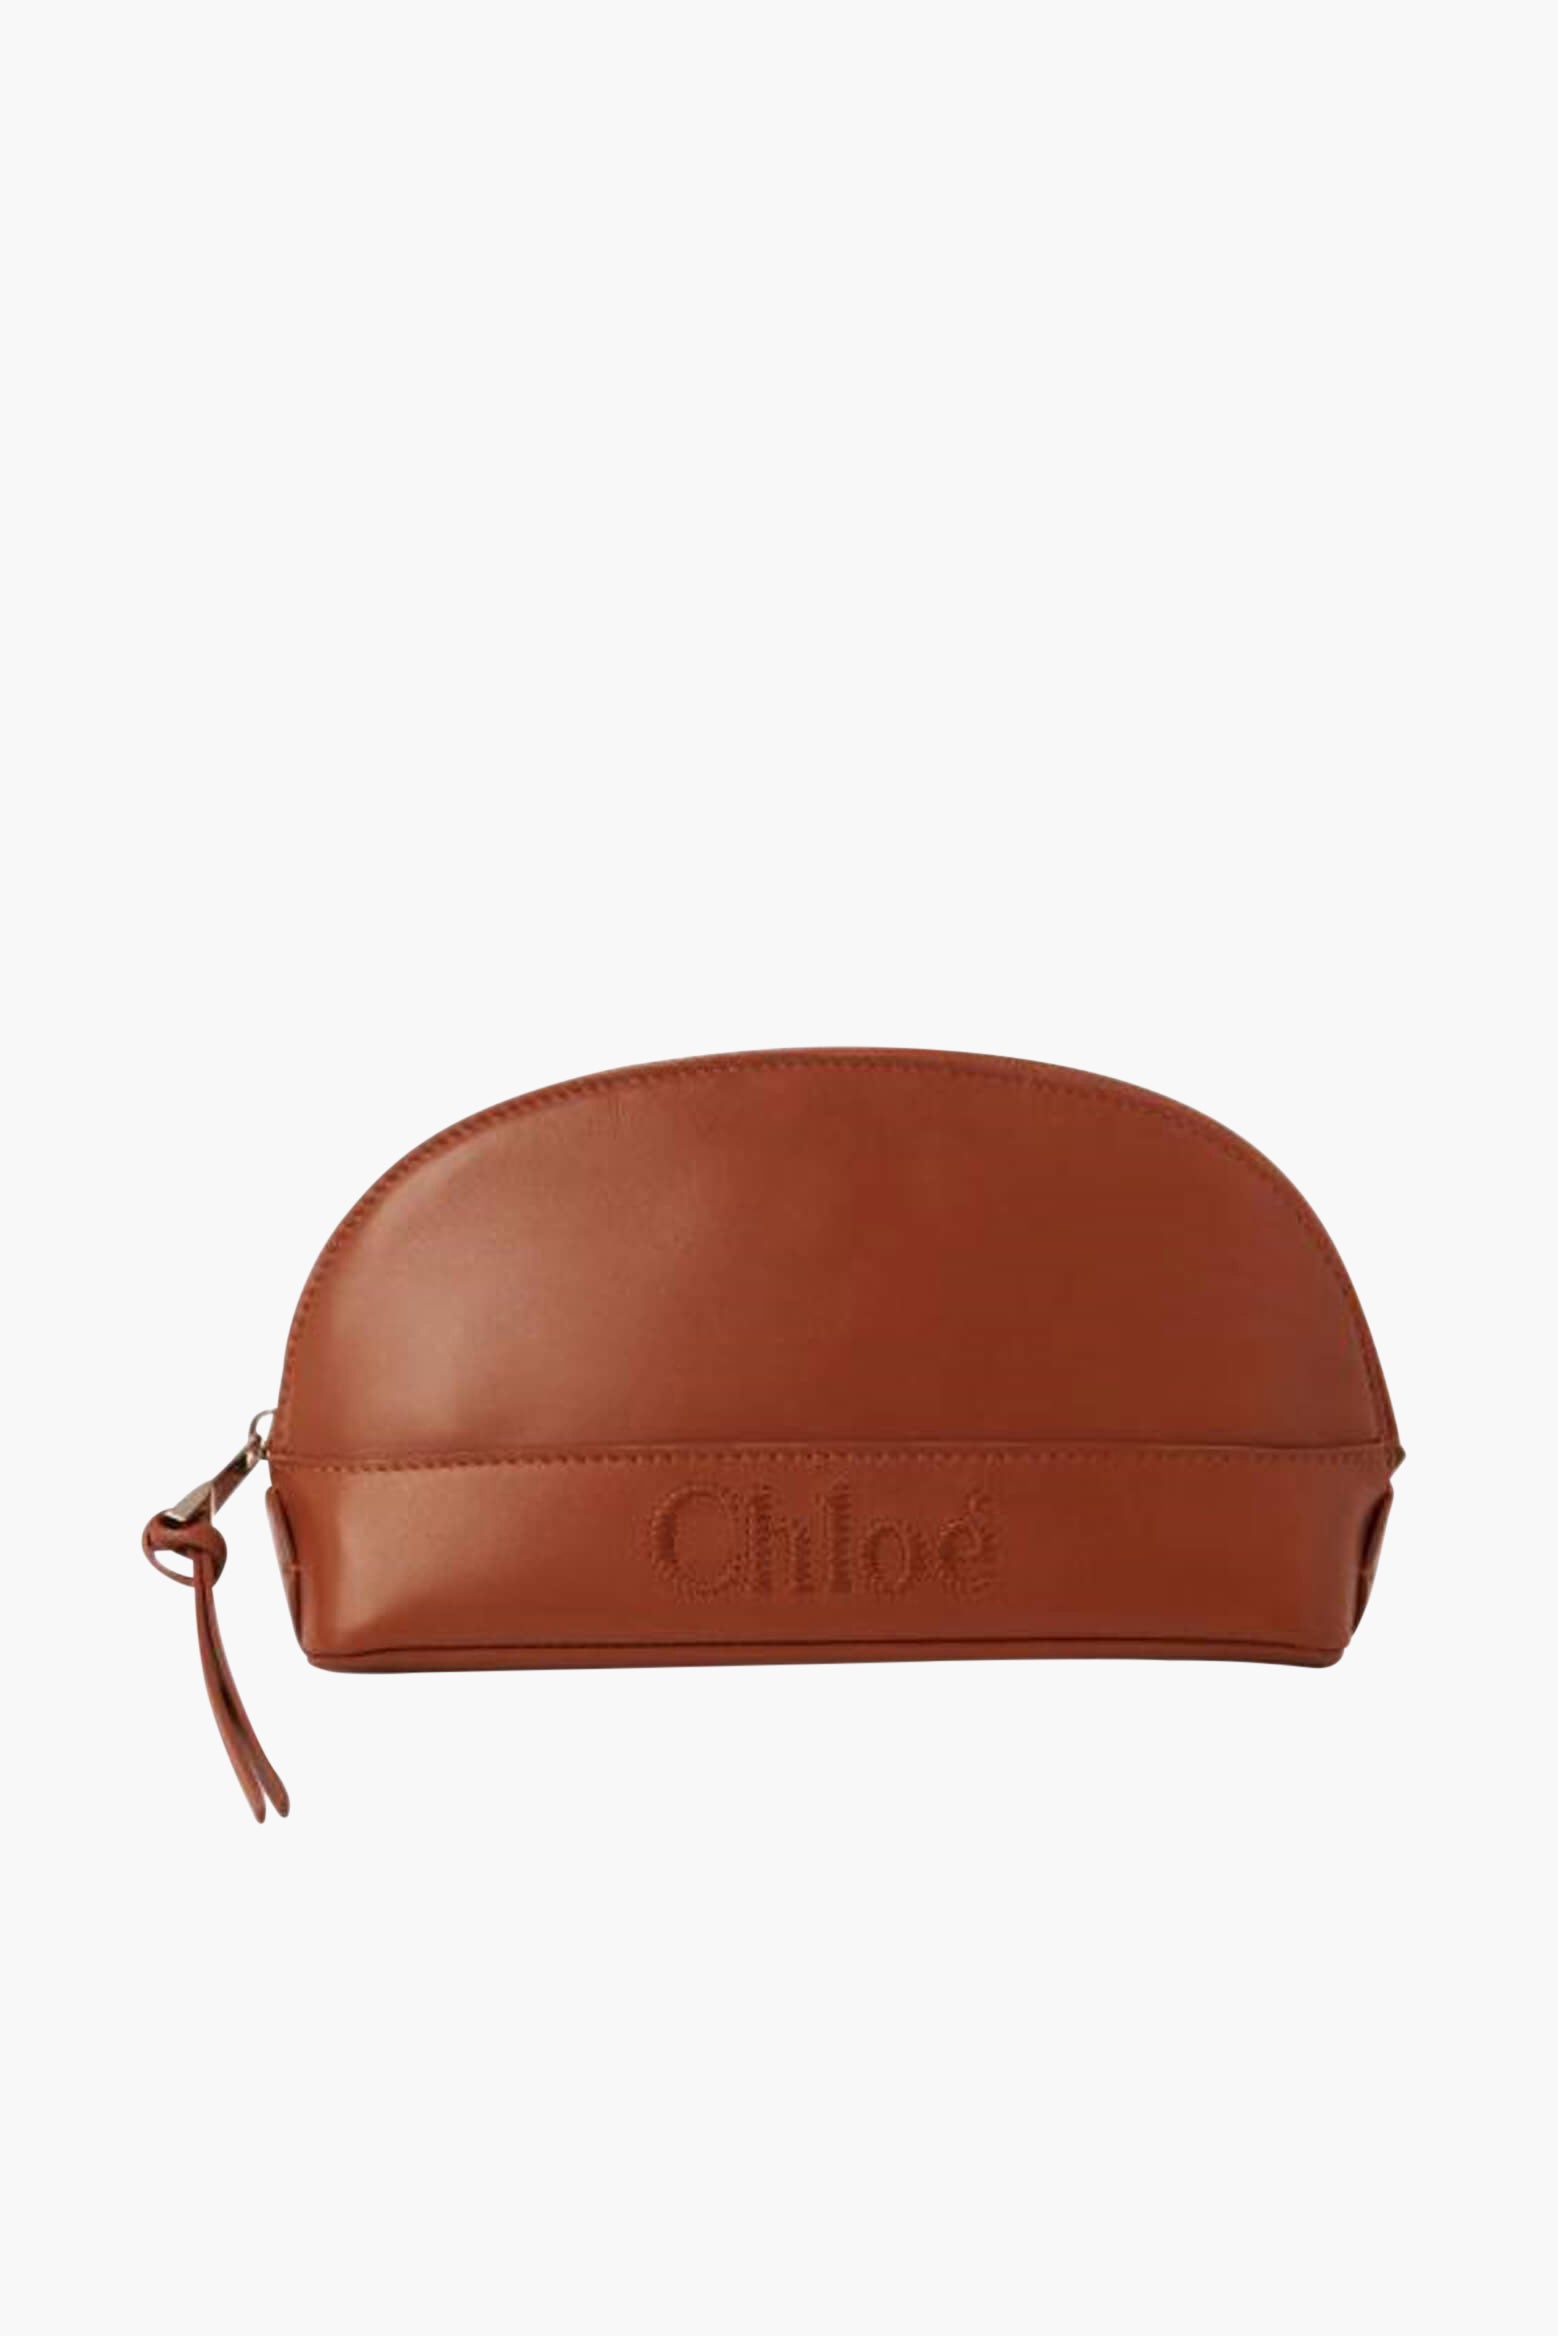 Chloe Sense Cosmetic Pouch in Caramel available at TNT The New Trend Australia.